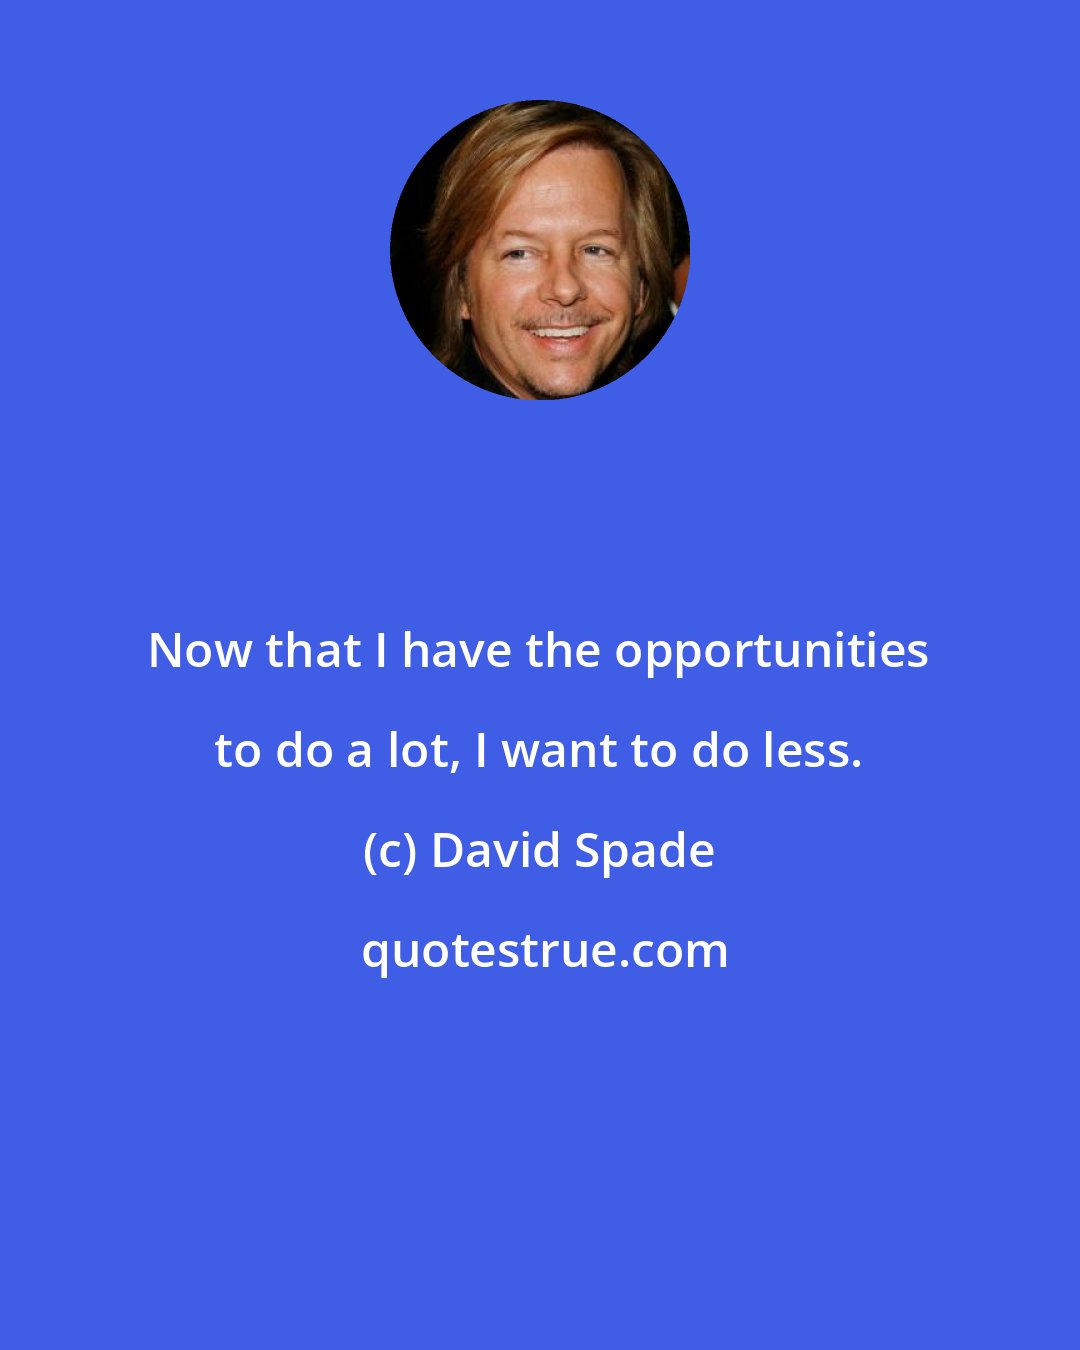 David Spade: Now that I have the opportunities to do a lot, I want to do less.